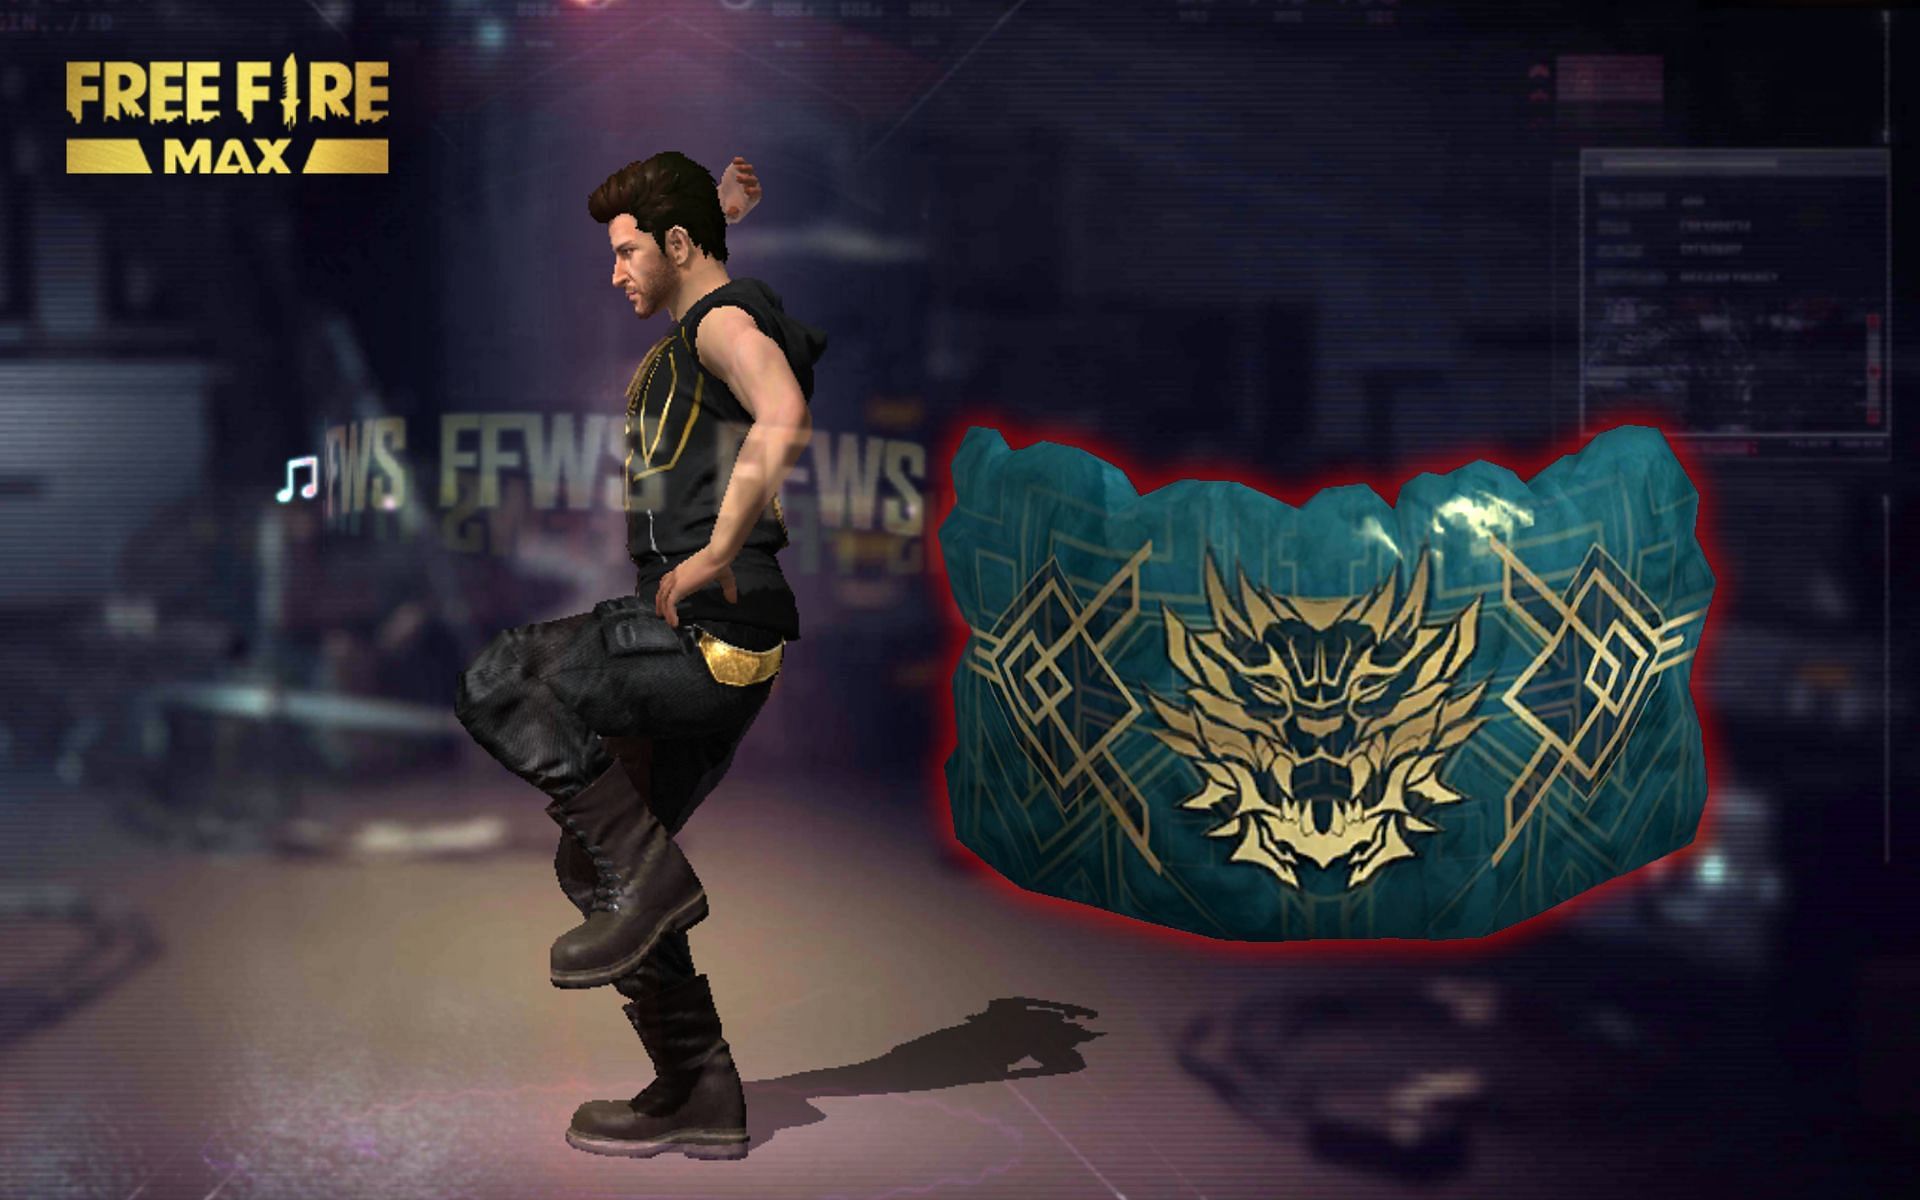 Gamers can get a number of rewards from watching the Free Fire event (Image via Sportskeeda)